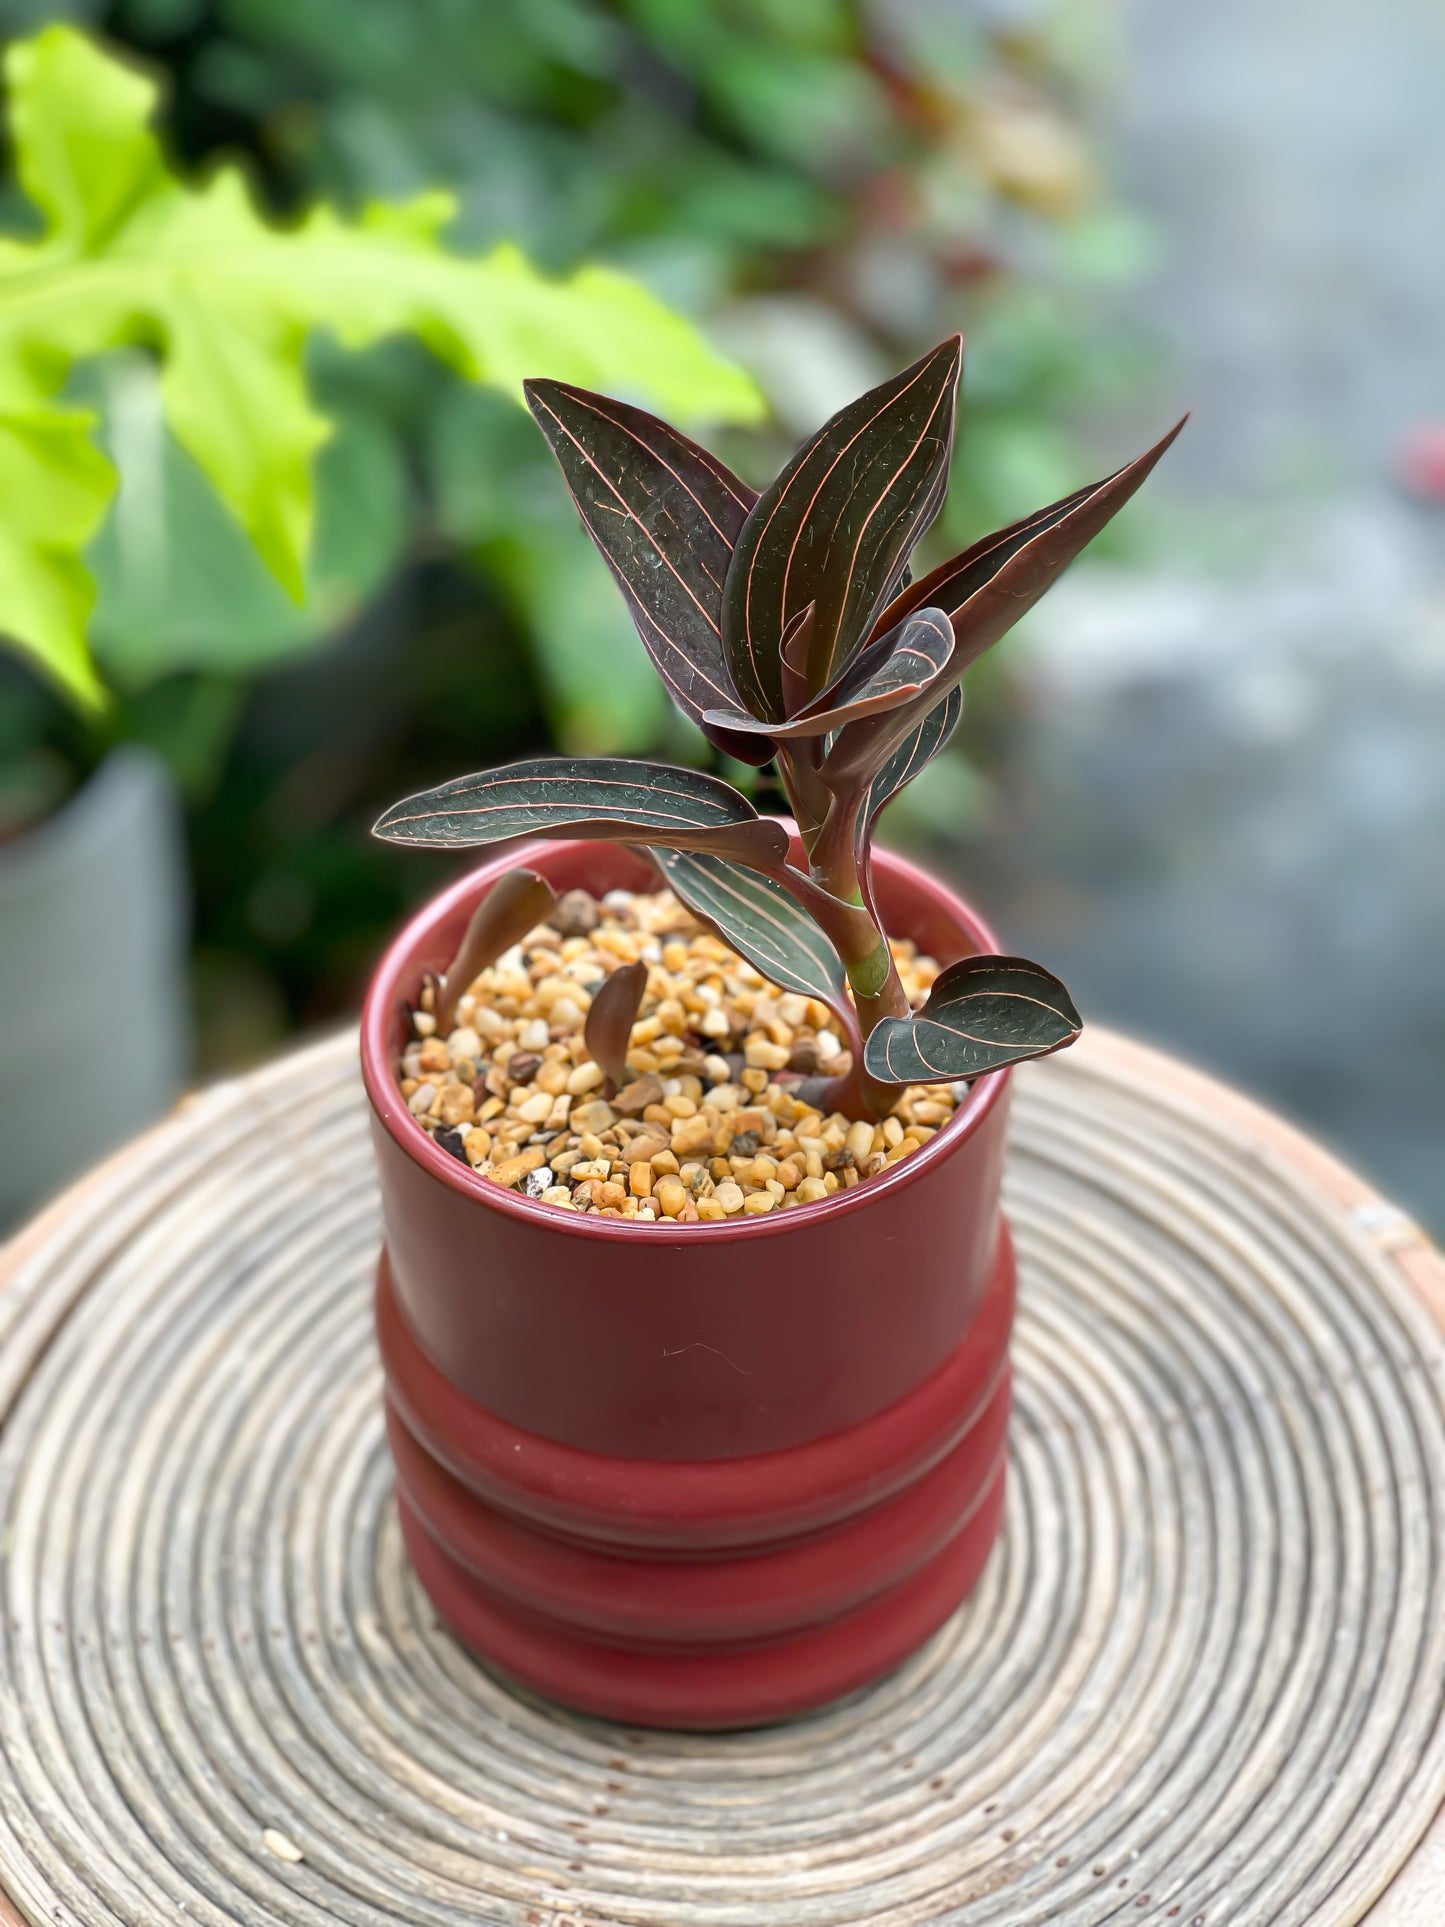 Ludisia Discolor Jewel Orchid styled with Burgundy Tin Planter